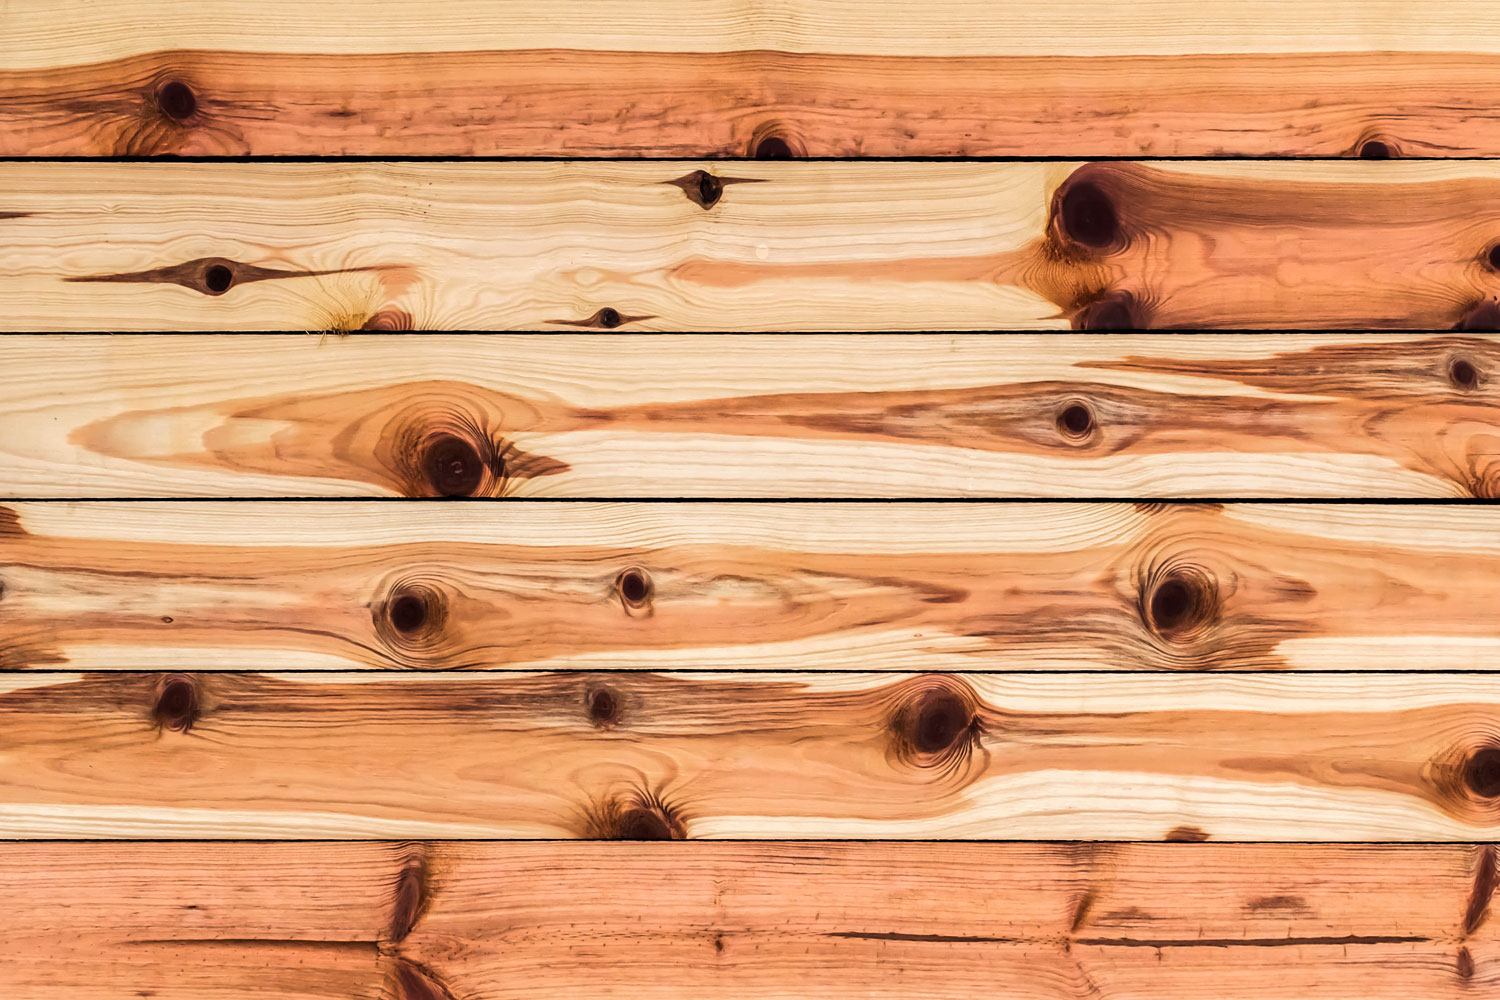 Knotty pine wall sidings for a rustic inspired living room, What Floor Goes With Knotty Pine Walls